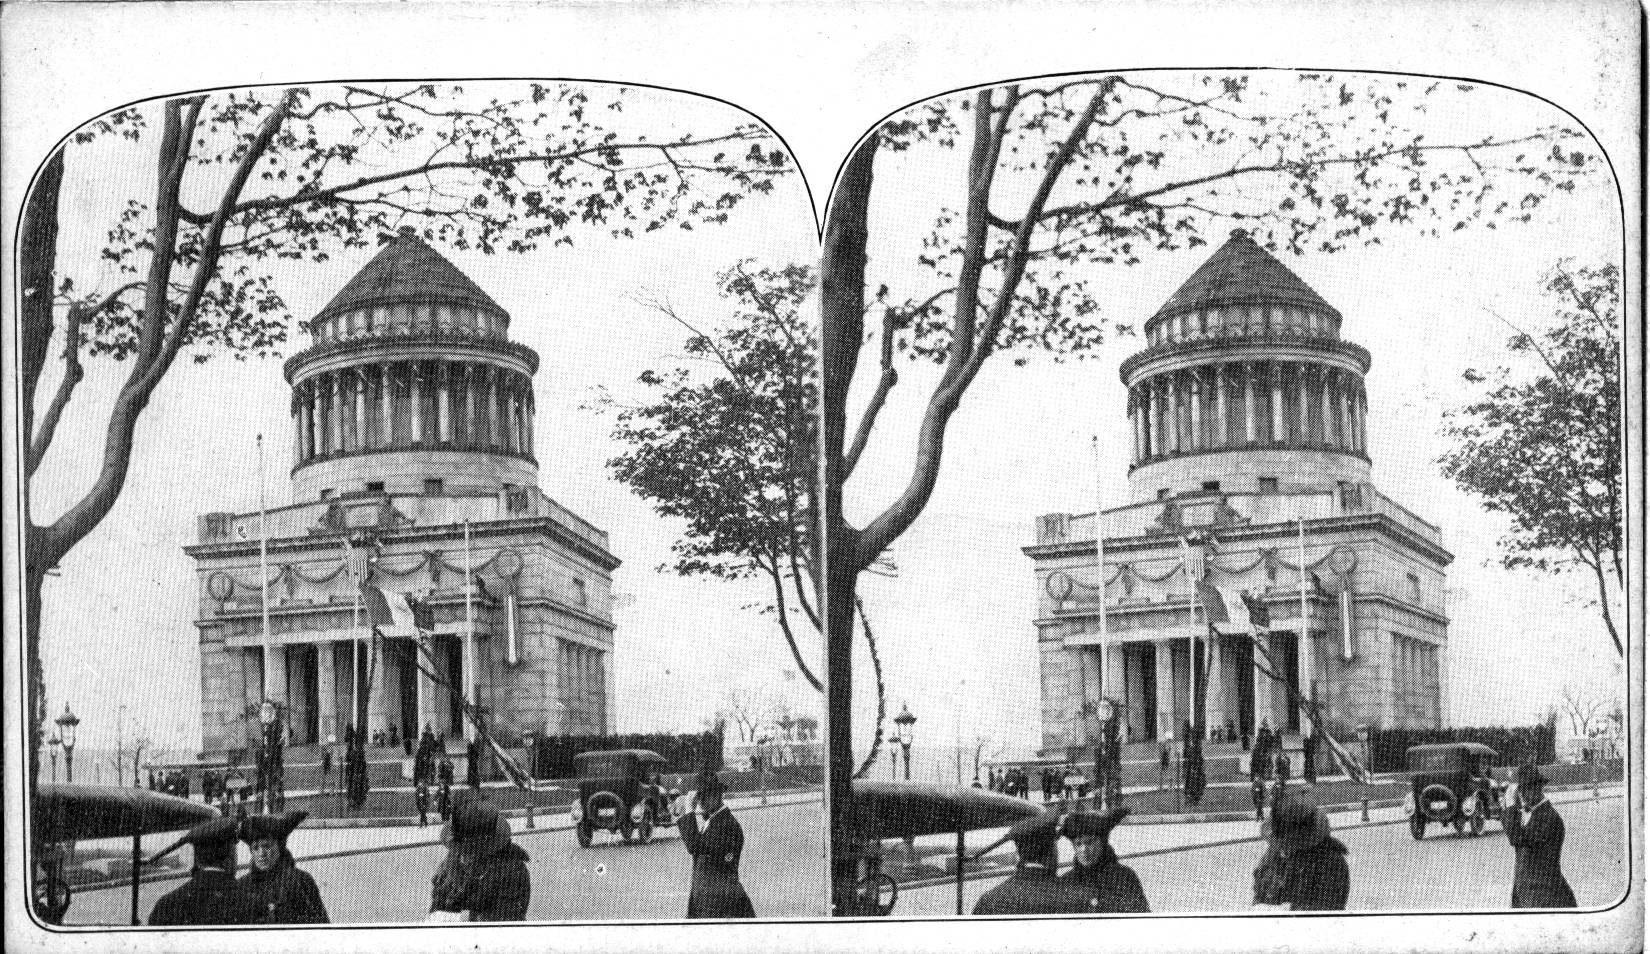 Grant's Tomb--Riverside Drive--New York City, on the Day Gen Joffre Visited It